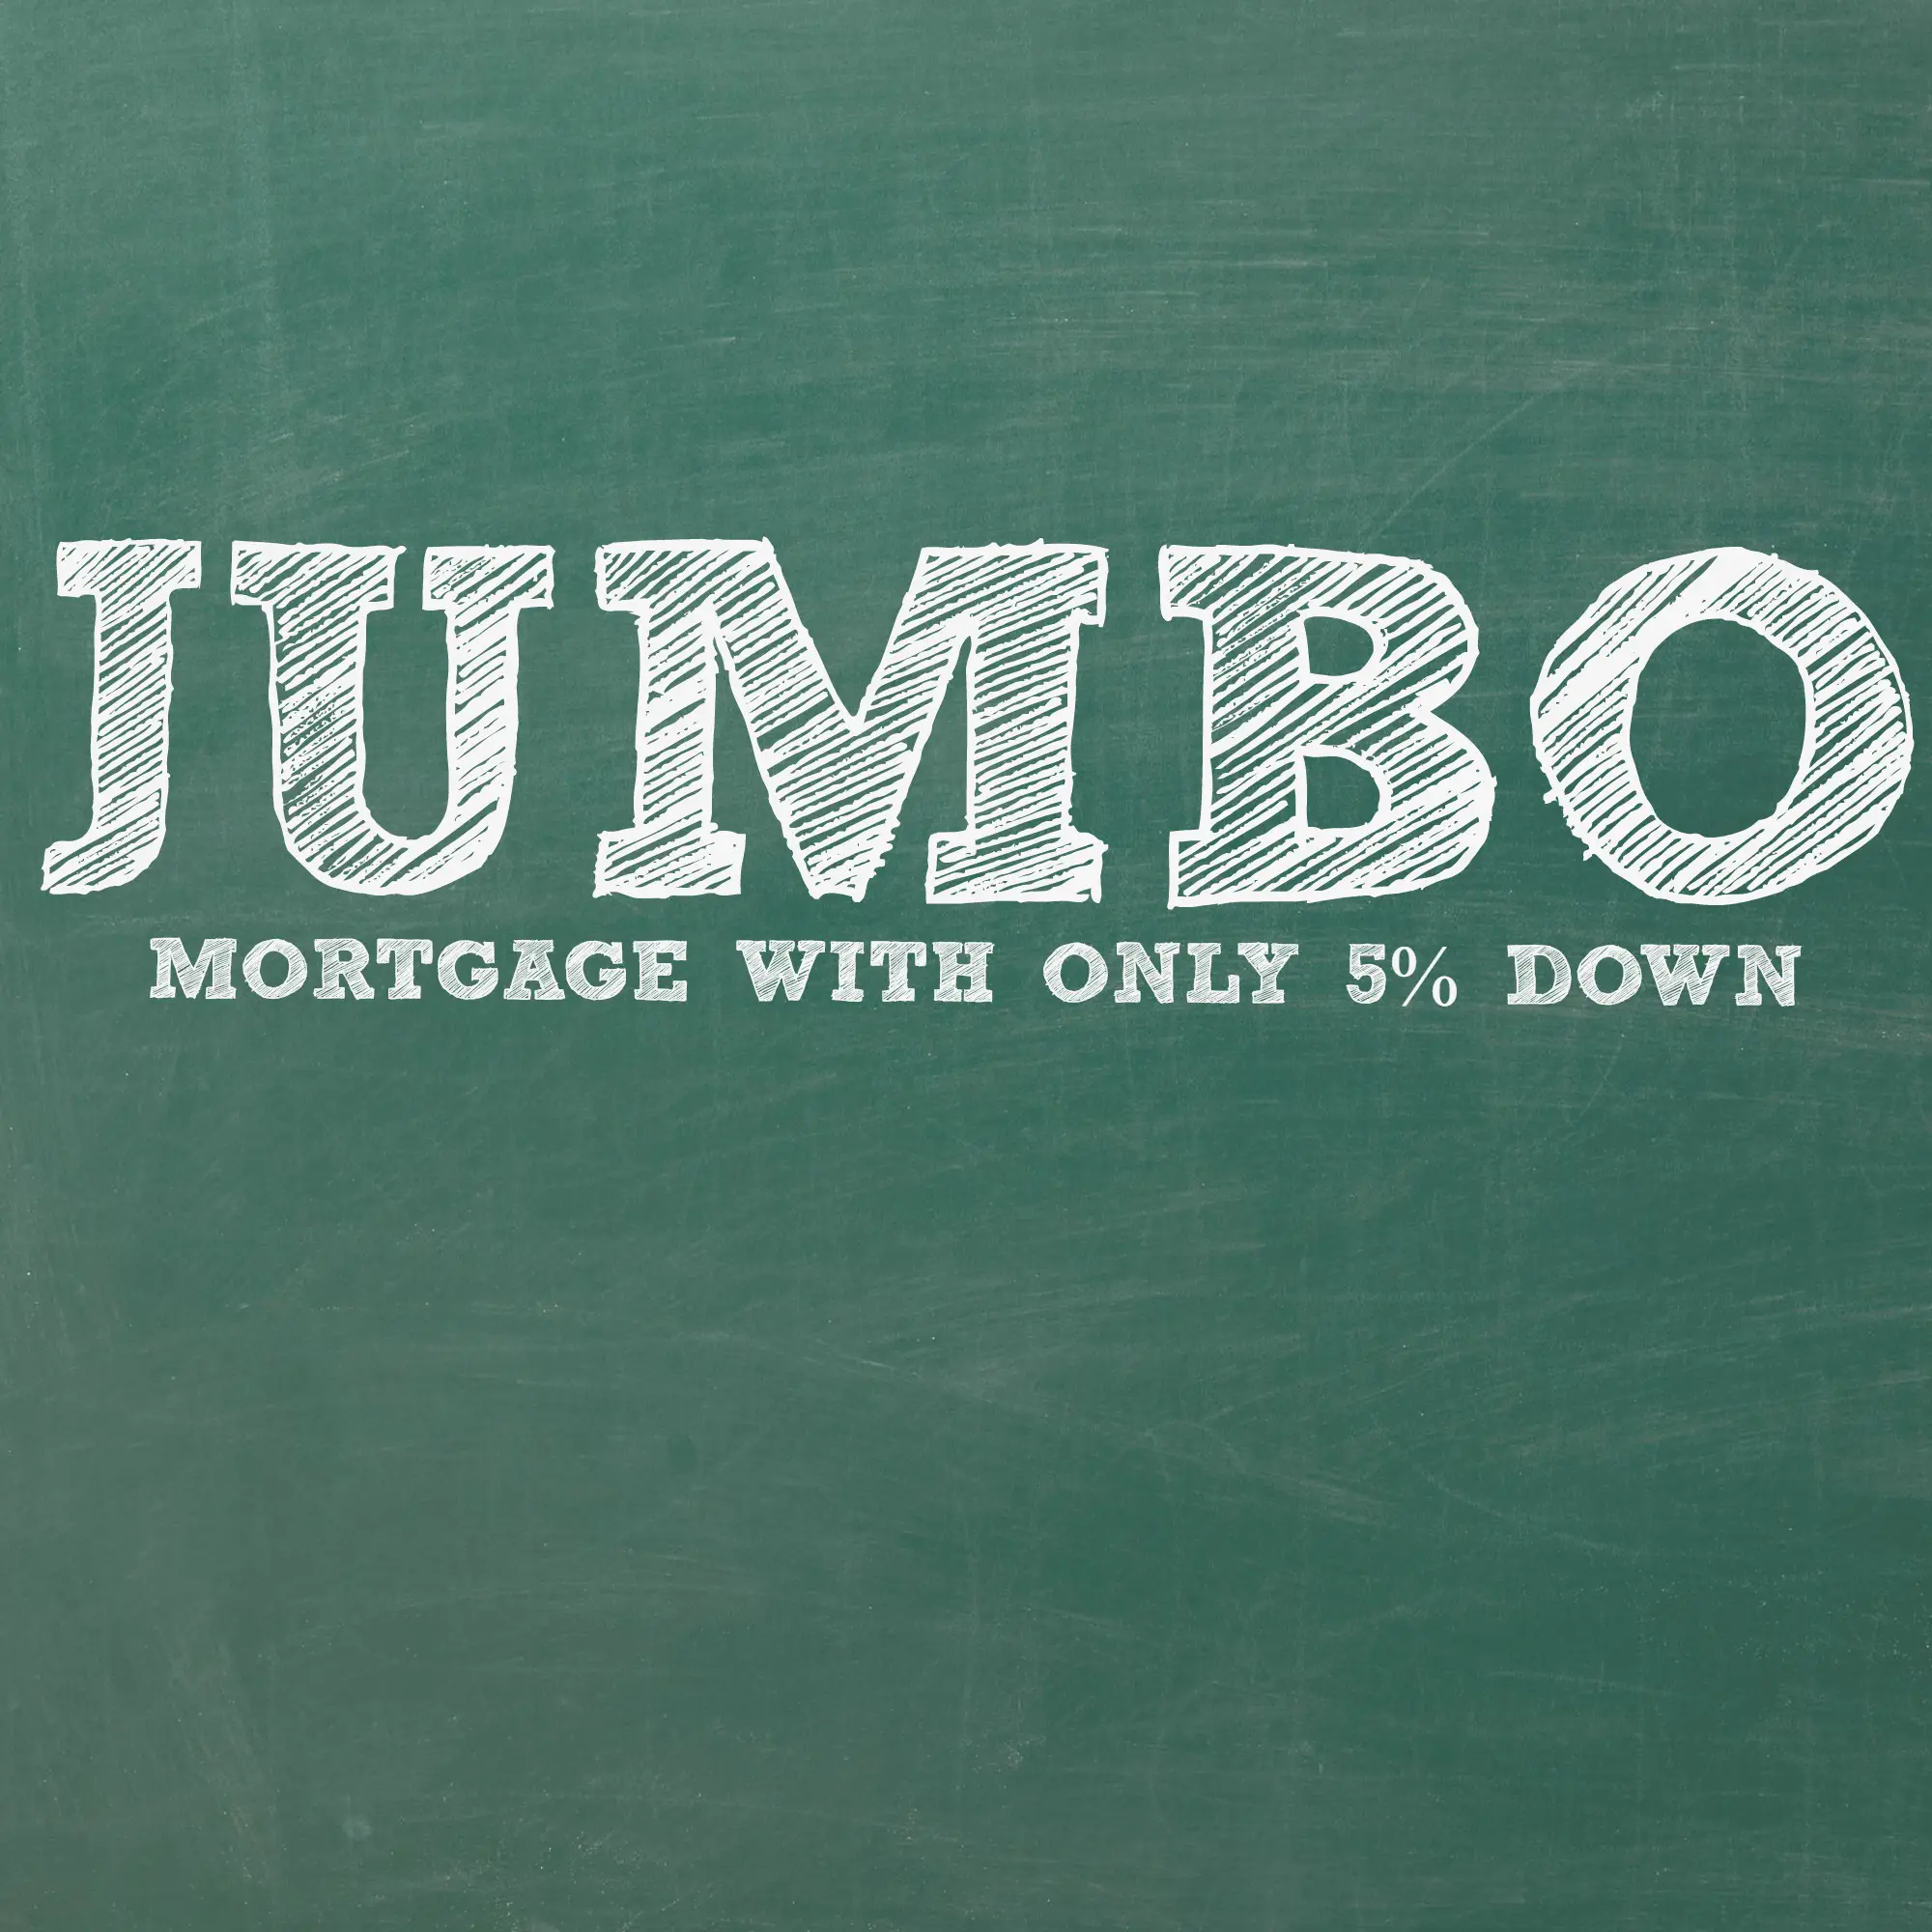 First Home Mortgage Offers a Jumbo Mortgage with Only 5